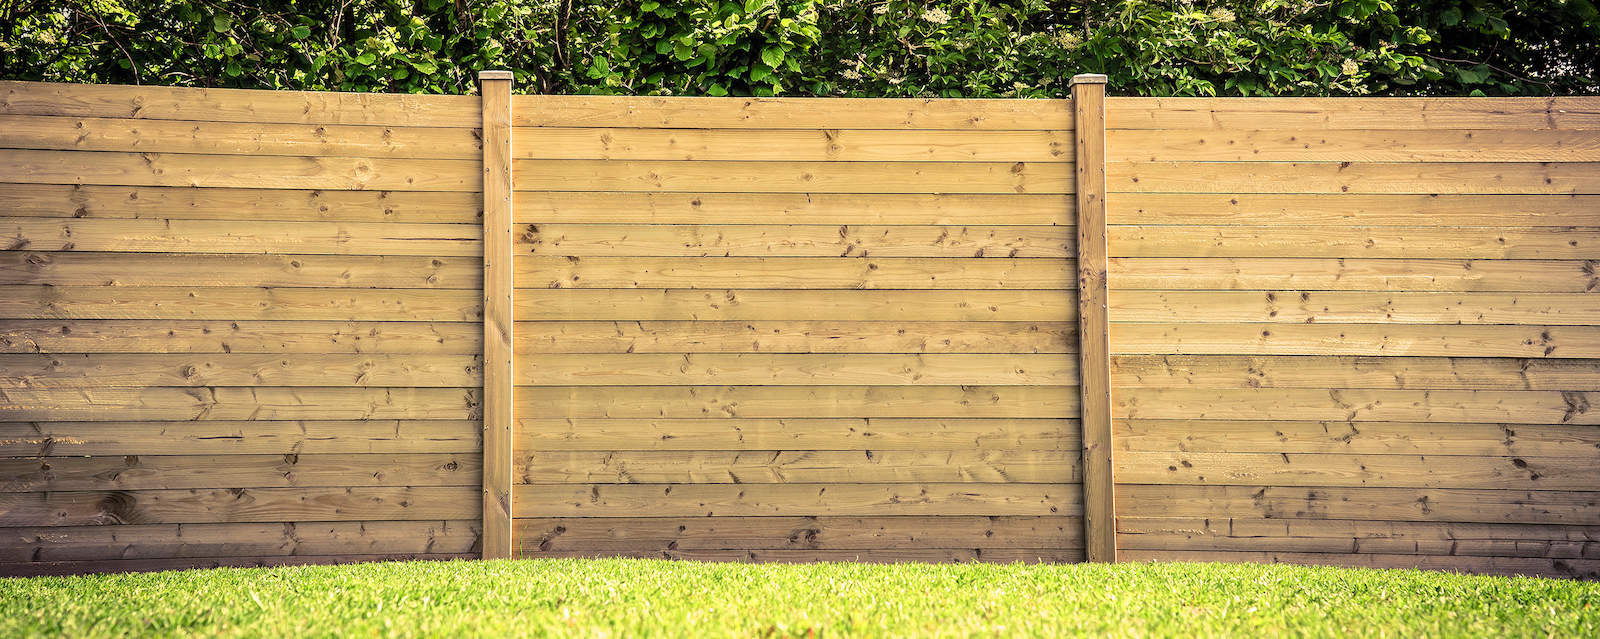 If you are looking for wooden garden fencing ideas, then you'll find t...